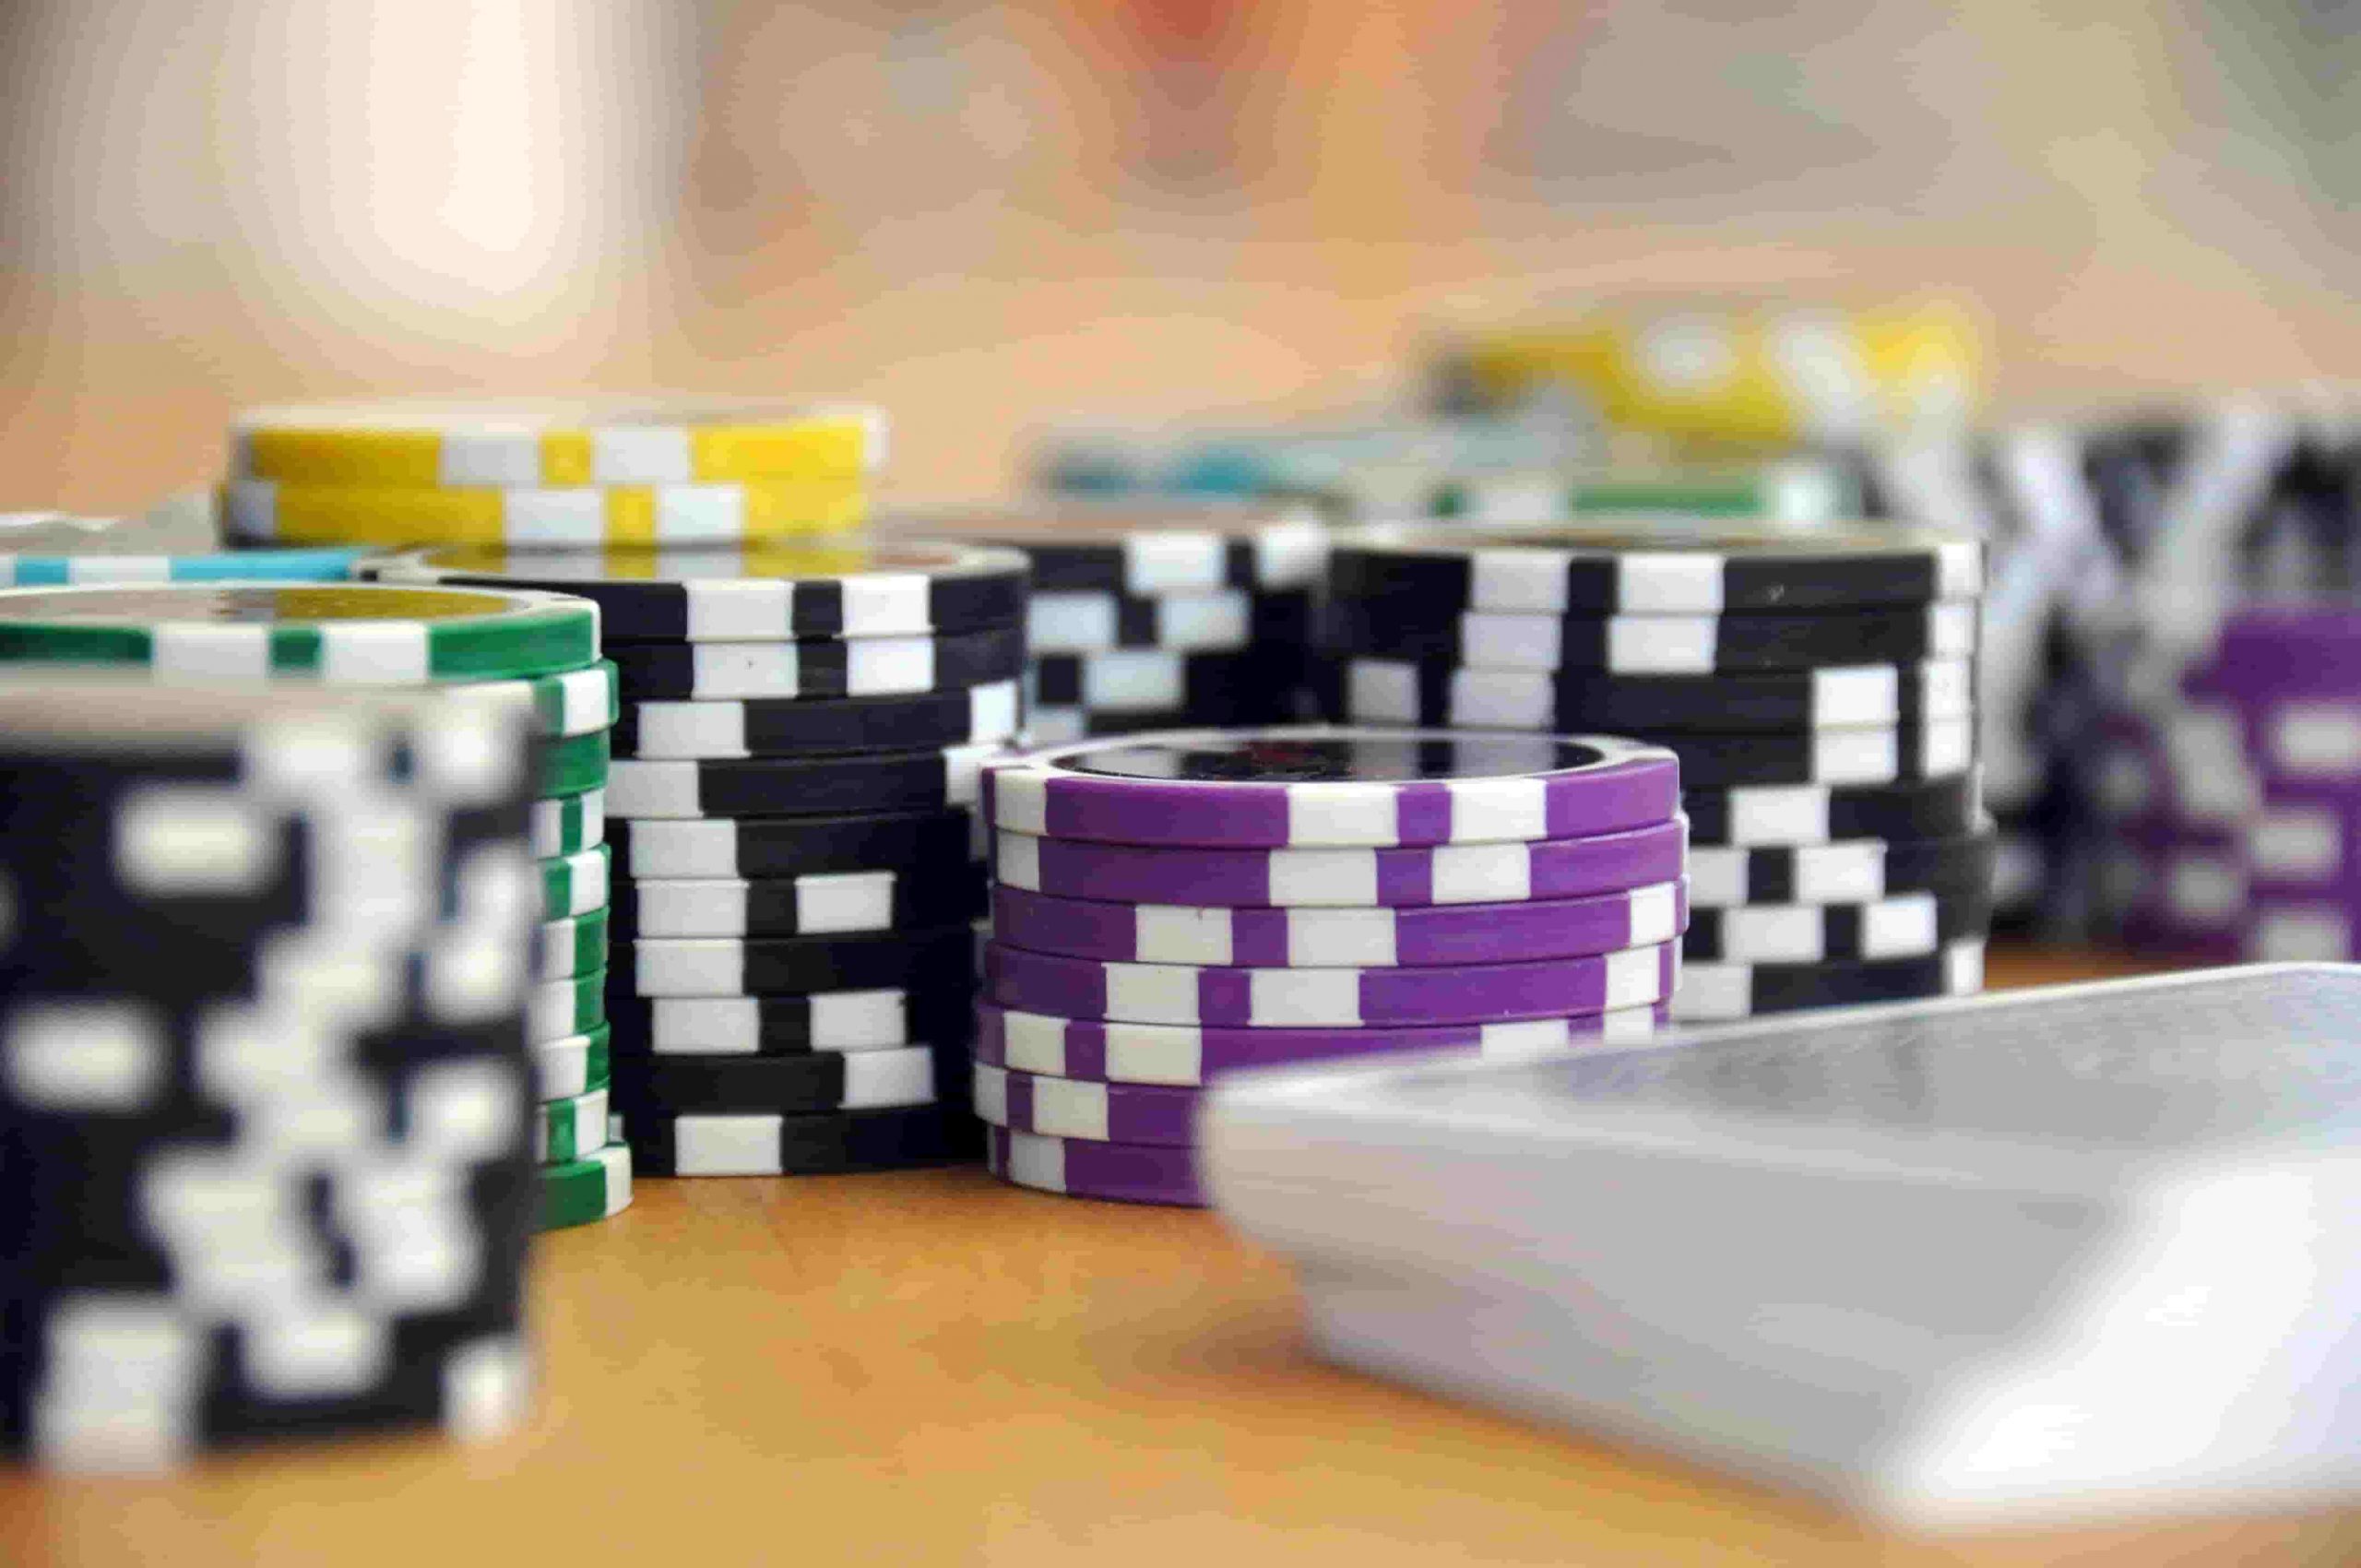 Idaho Poker – Compare The Best Real Money Poker Sites In ID